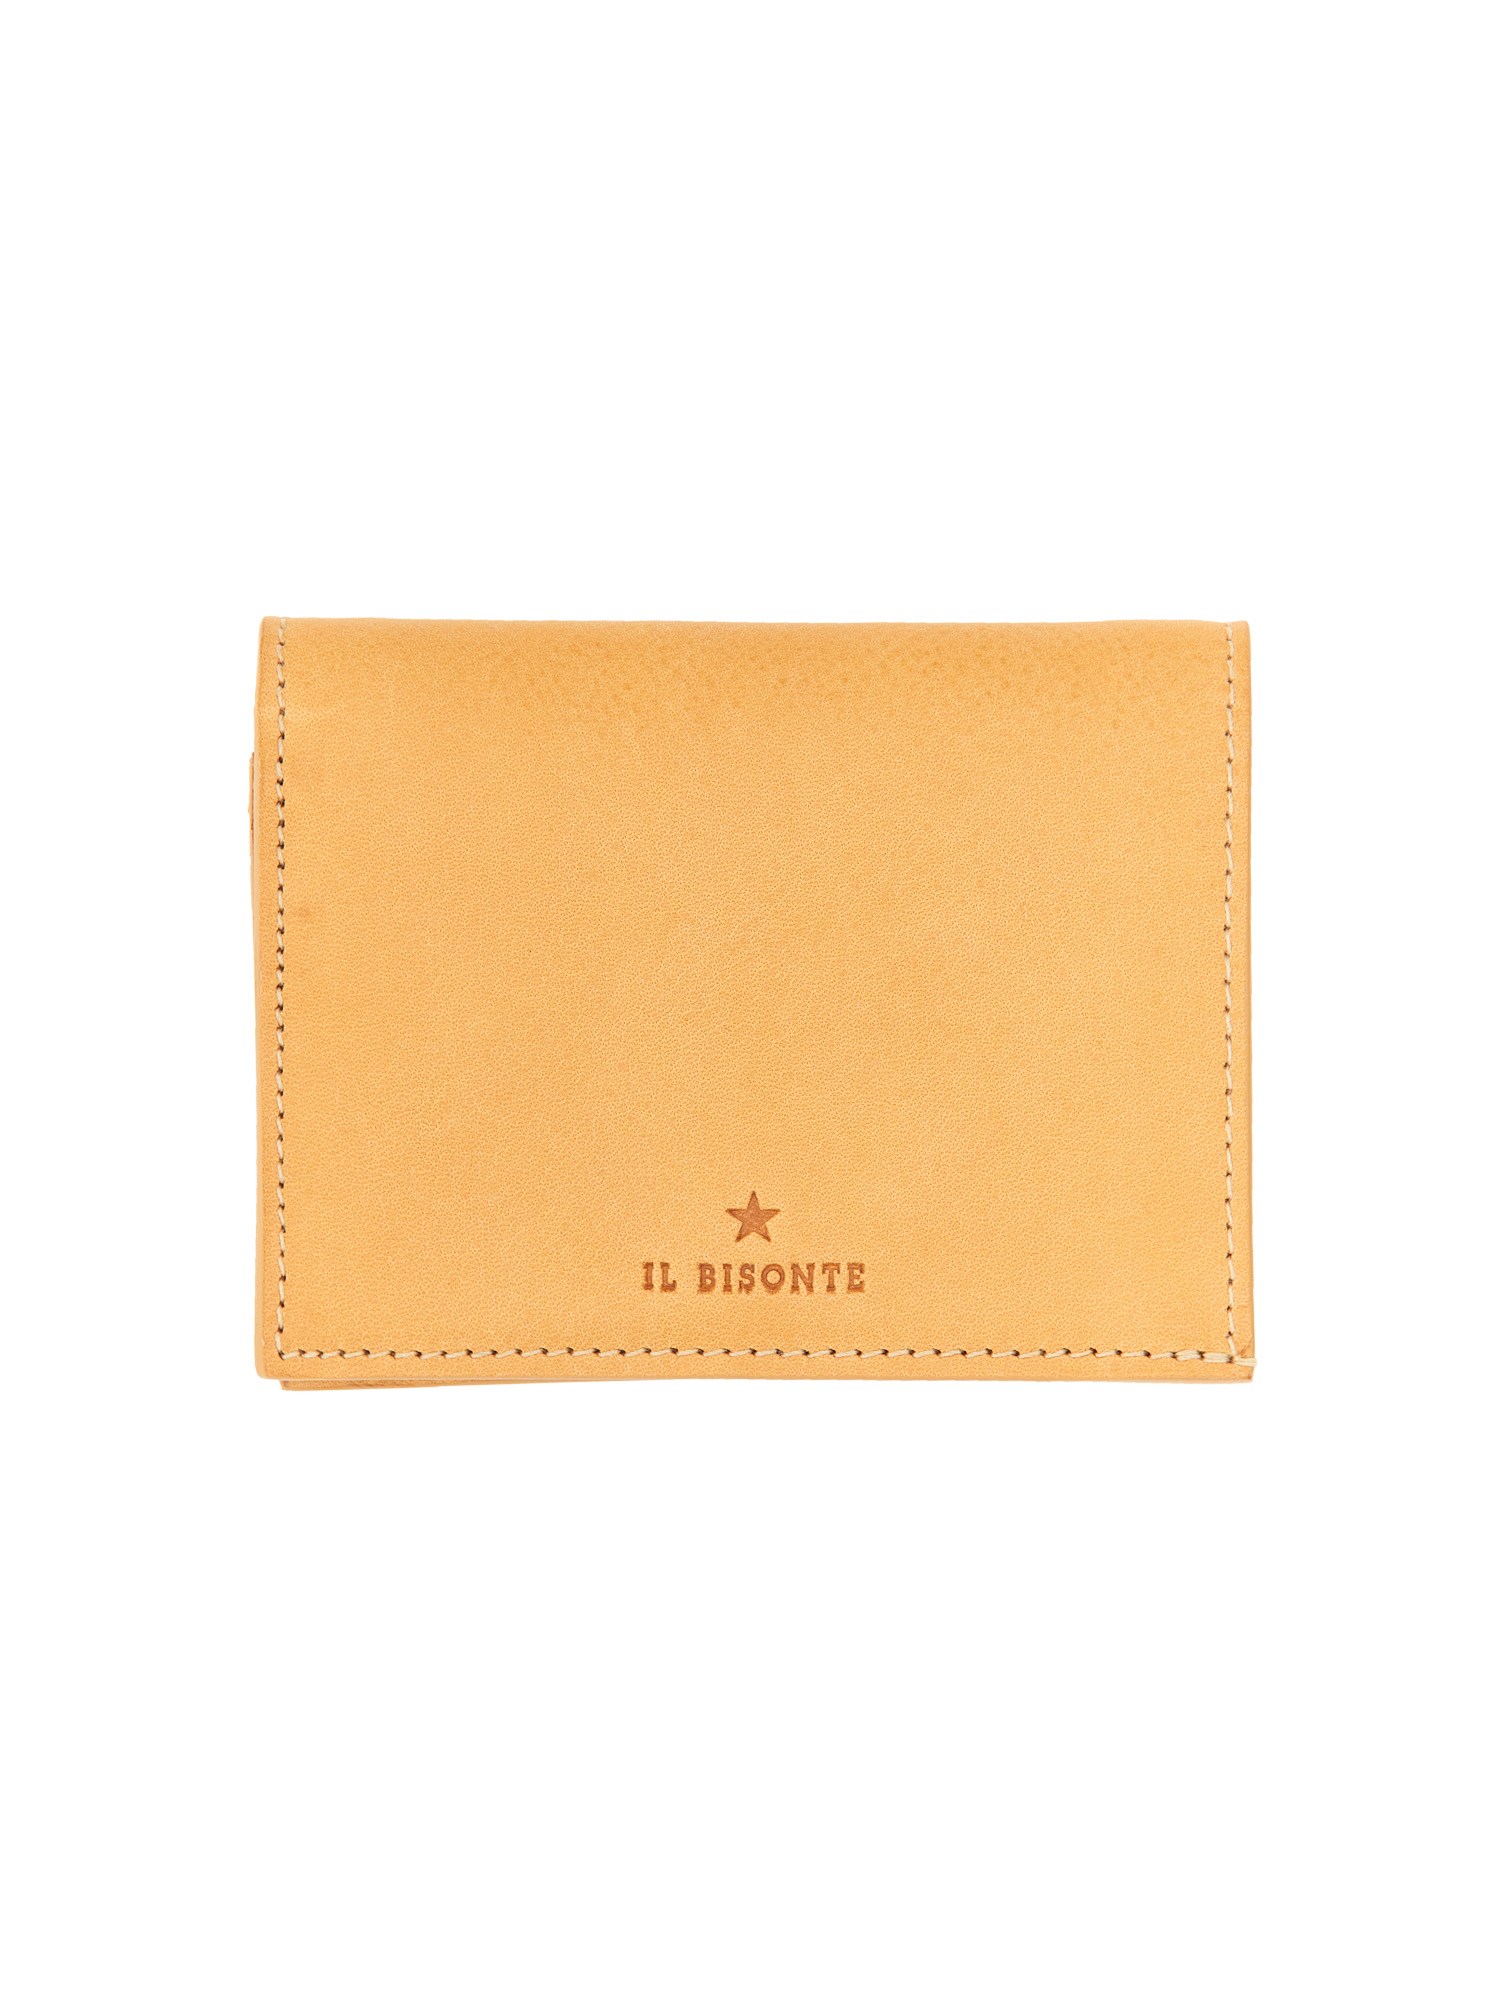 il bisonte small leather wallet